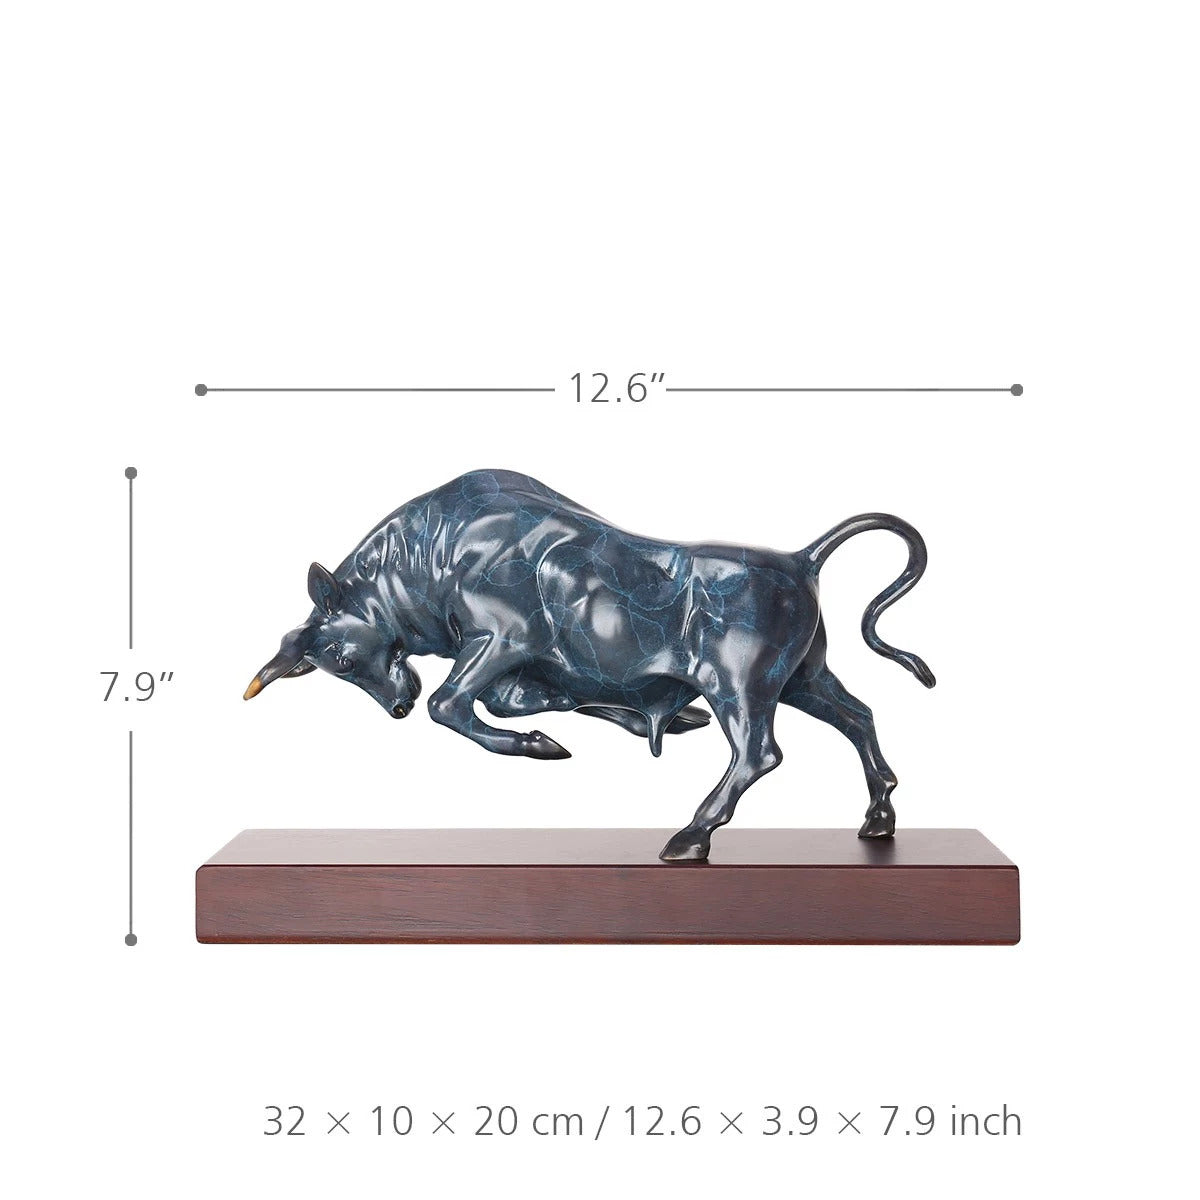 Farmhouse and Rustic Home Decor with Bull Sculpture